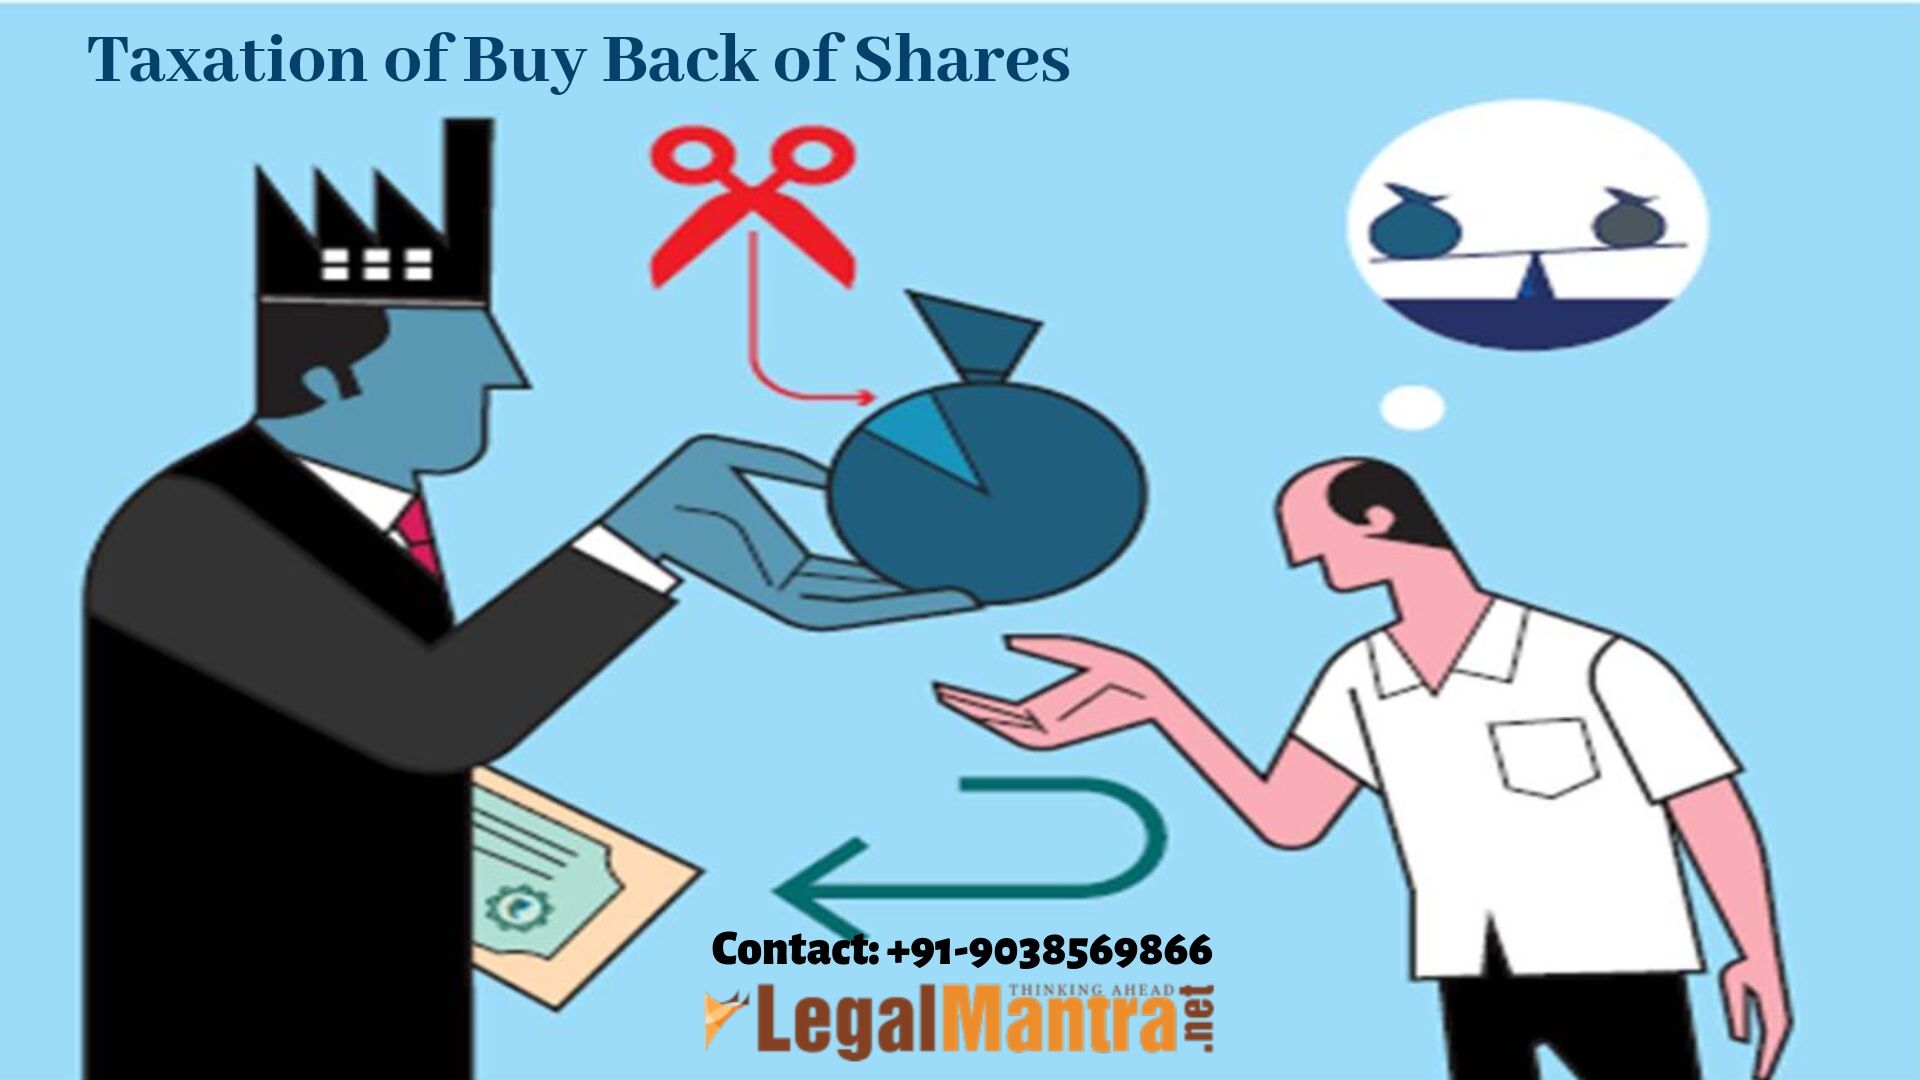 Taxation of Buy Back of Shares